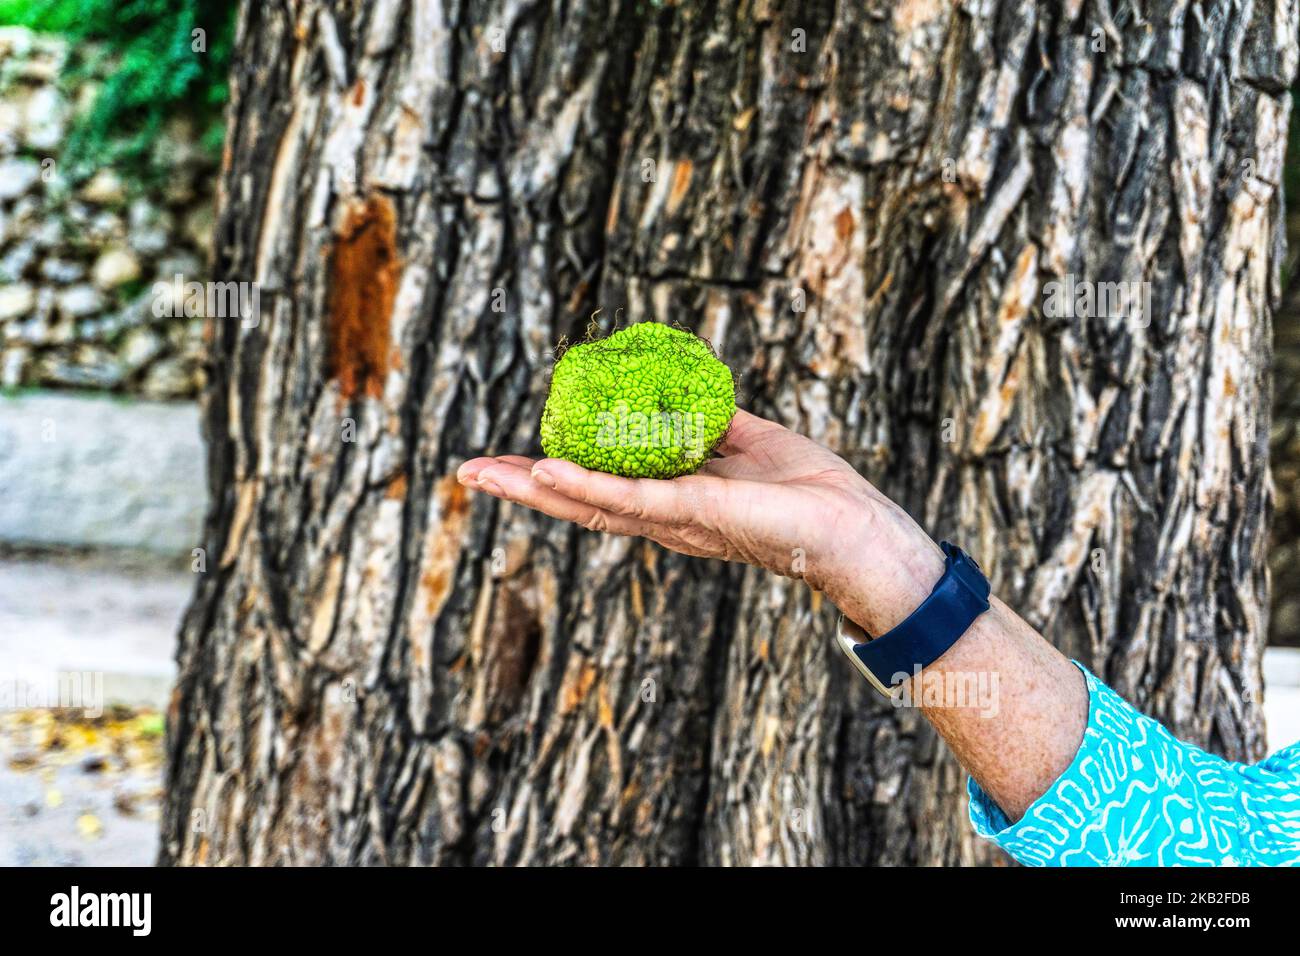 A woman holding the seed ball of the Osage Orange Tree. Pictured against the distinctive bark of the Osage Orange Tree. Stock Photo